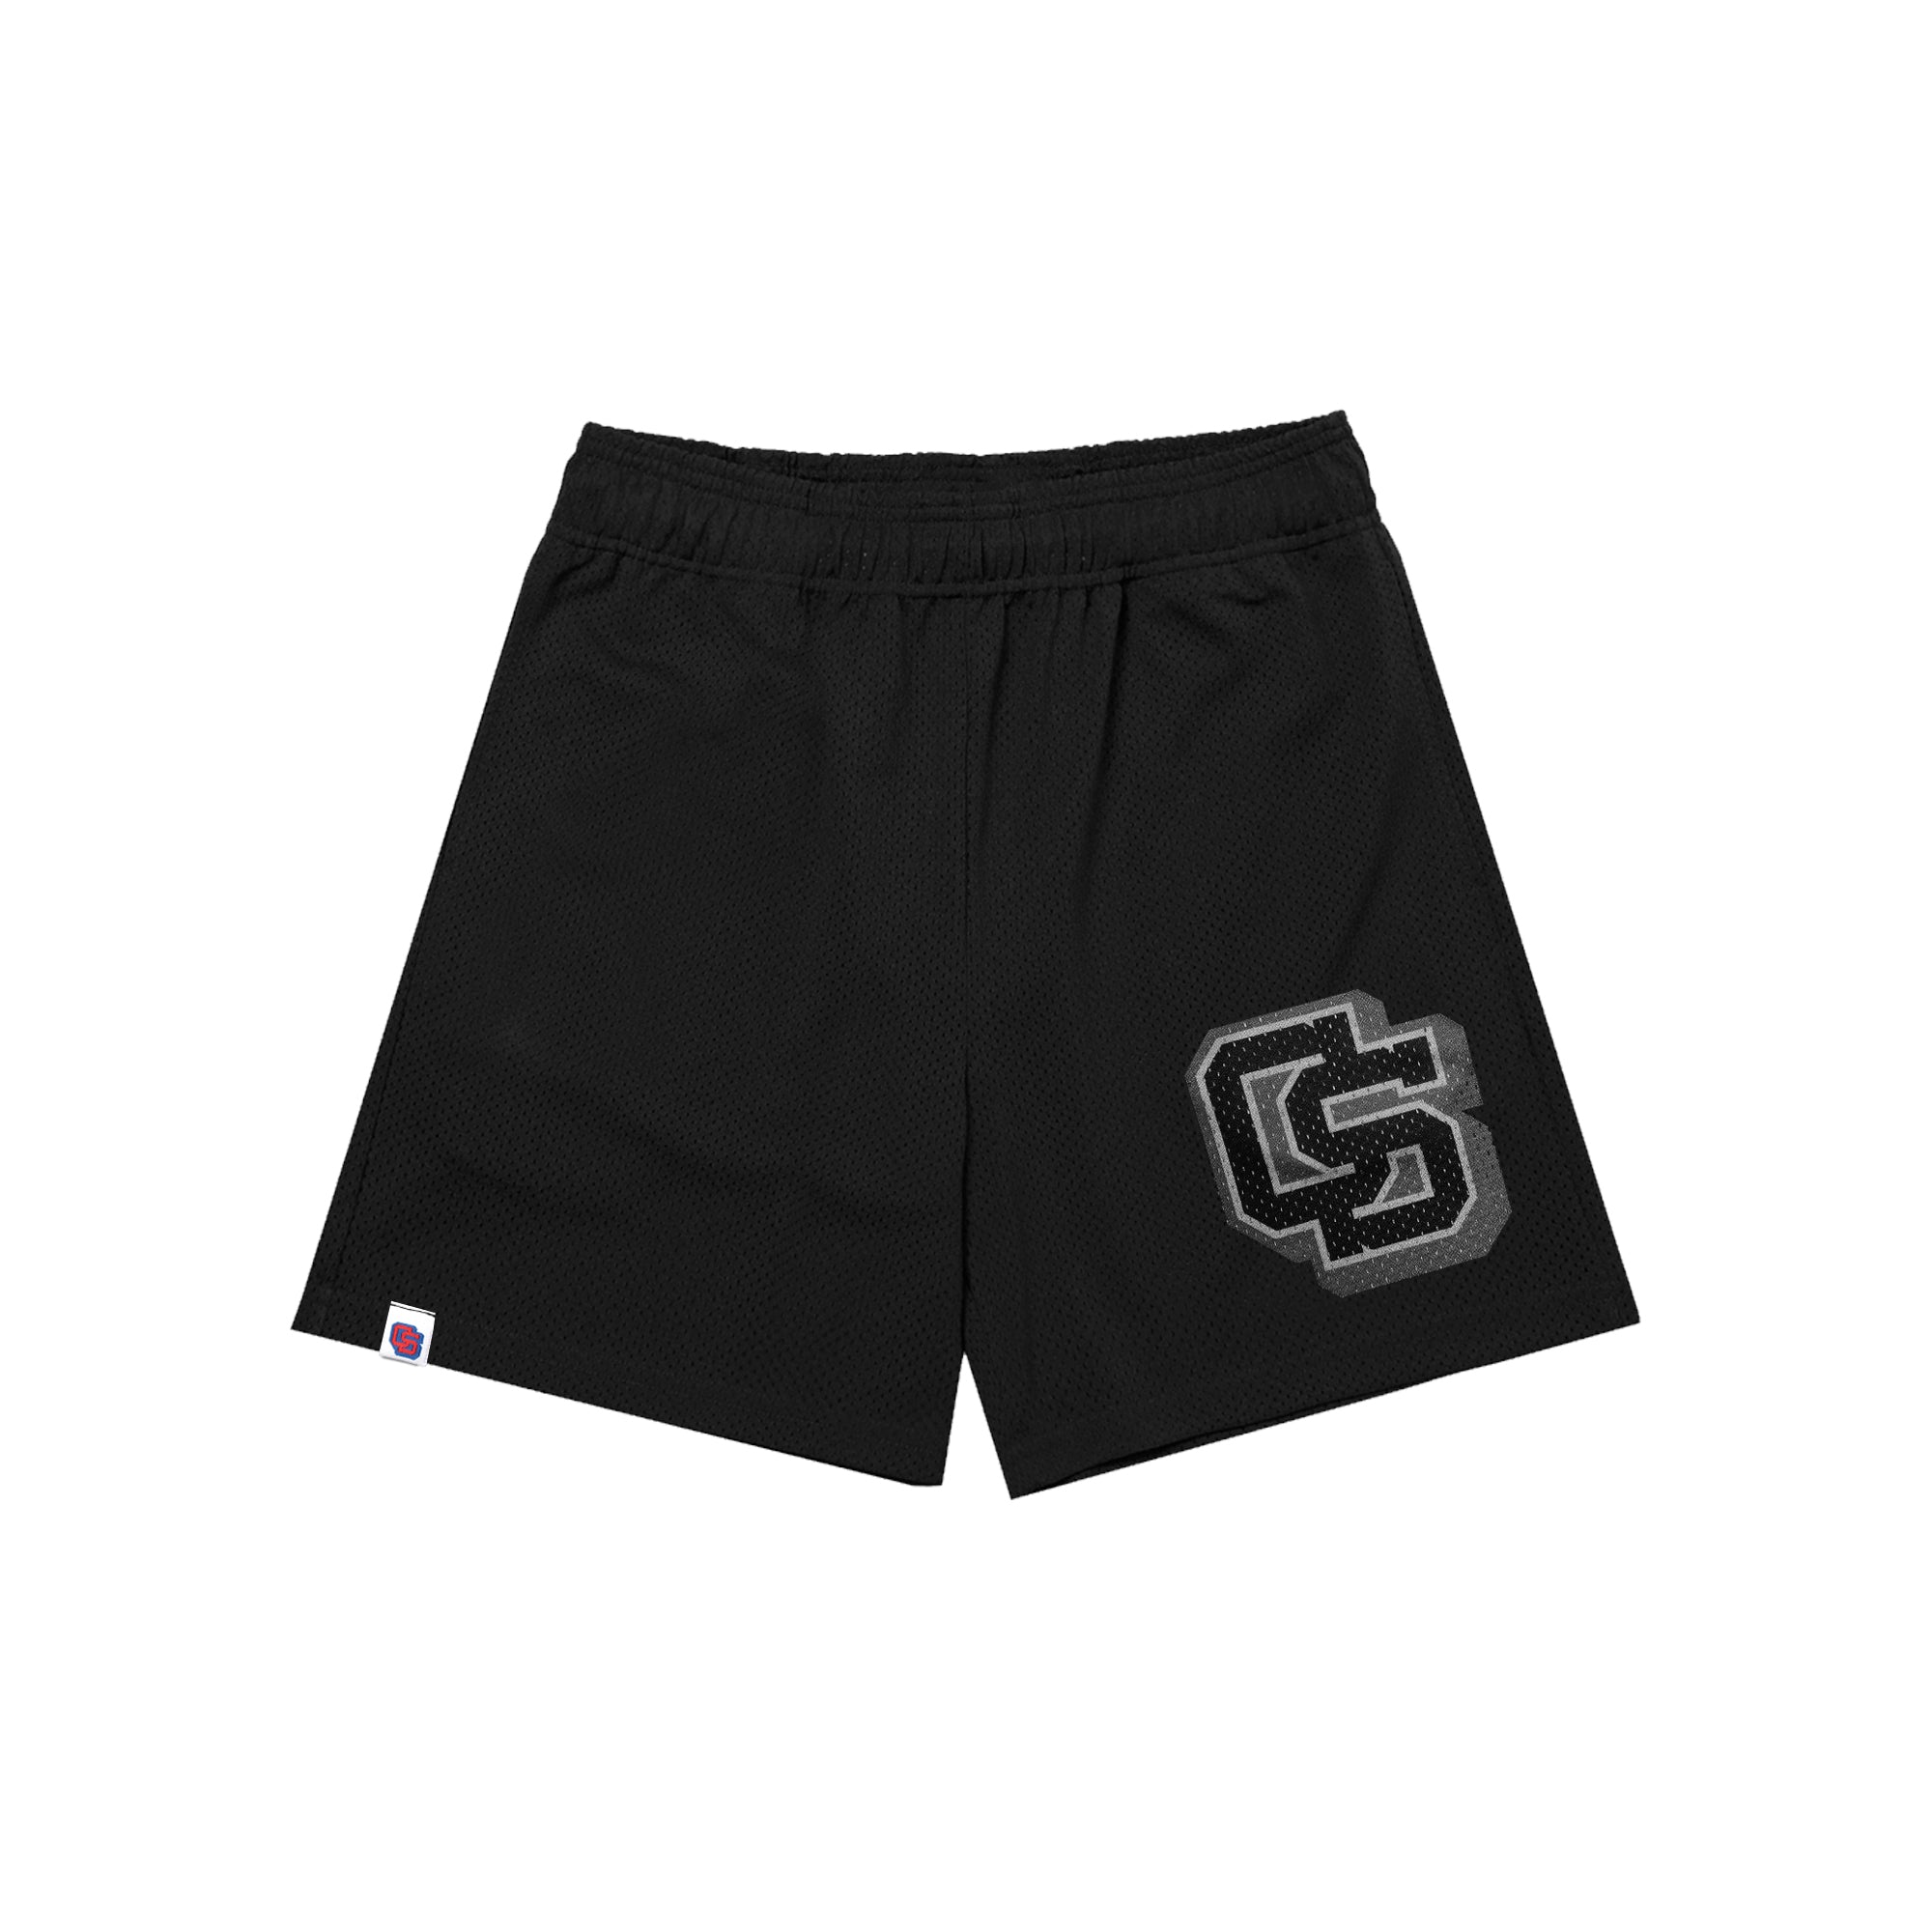 SELECT PRACTICE SHORTS